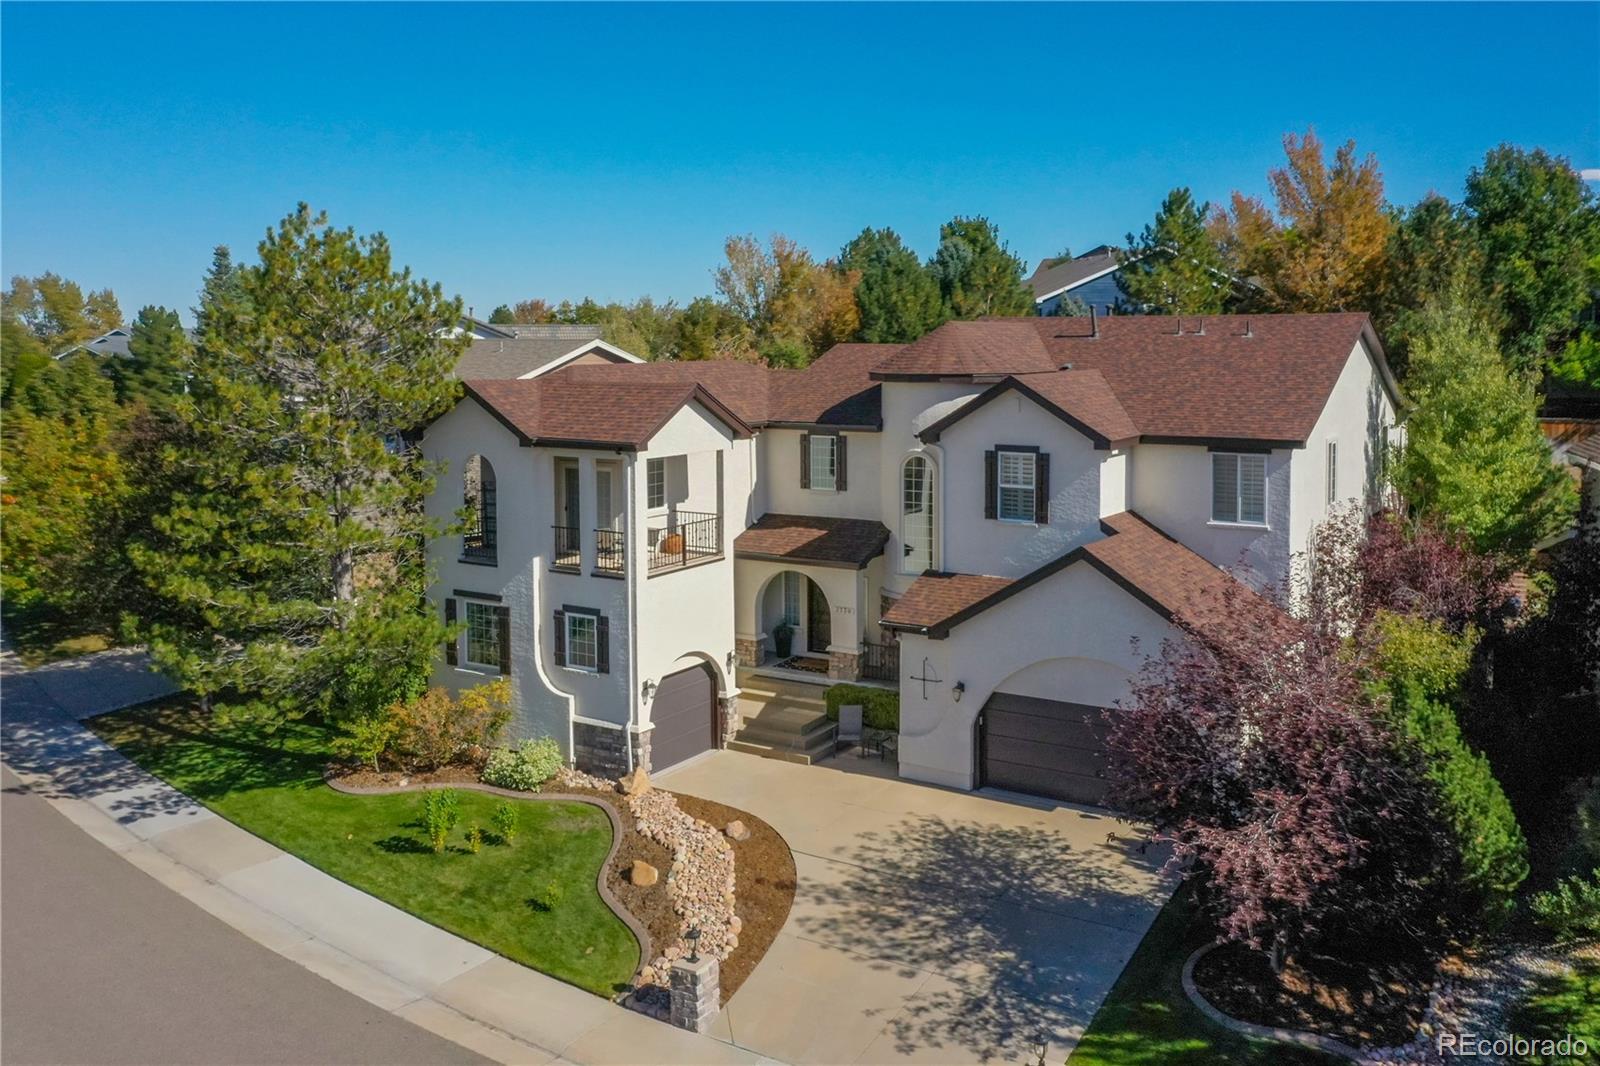 Report Image for 2730  Timberchase Trail,Highlands Ranch, Colorado